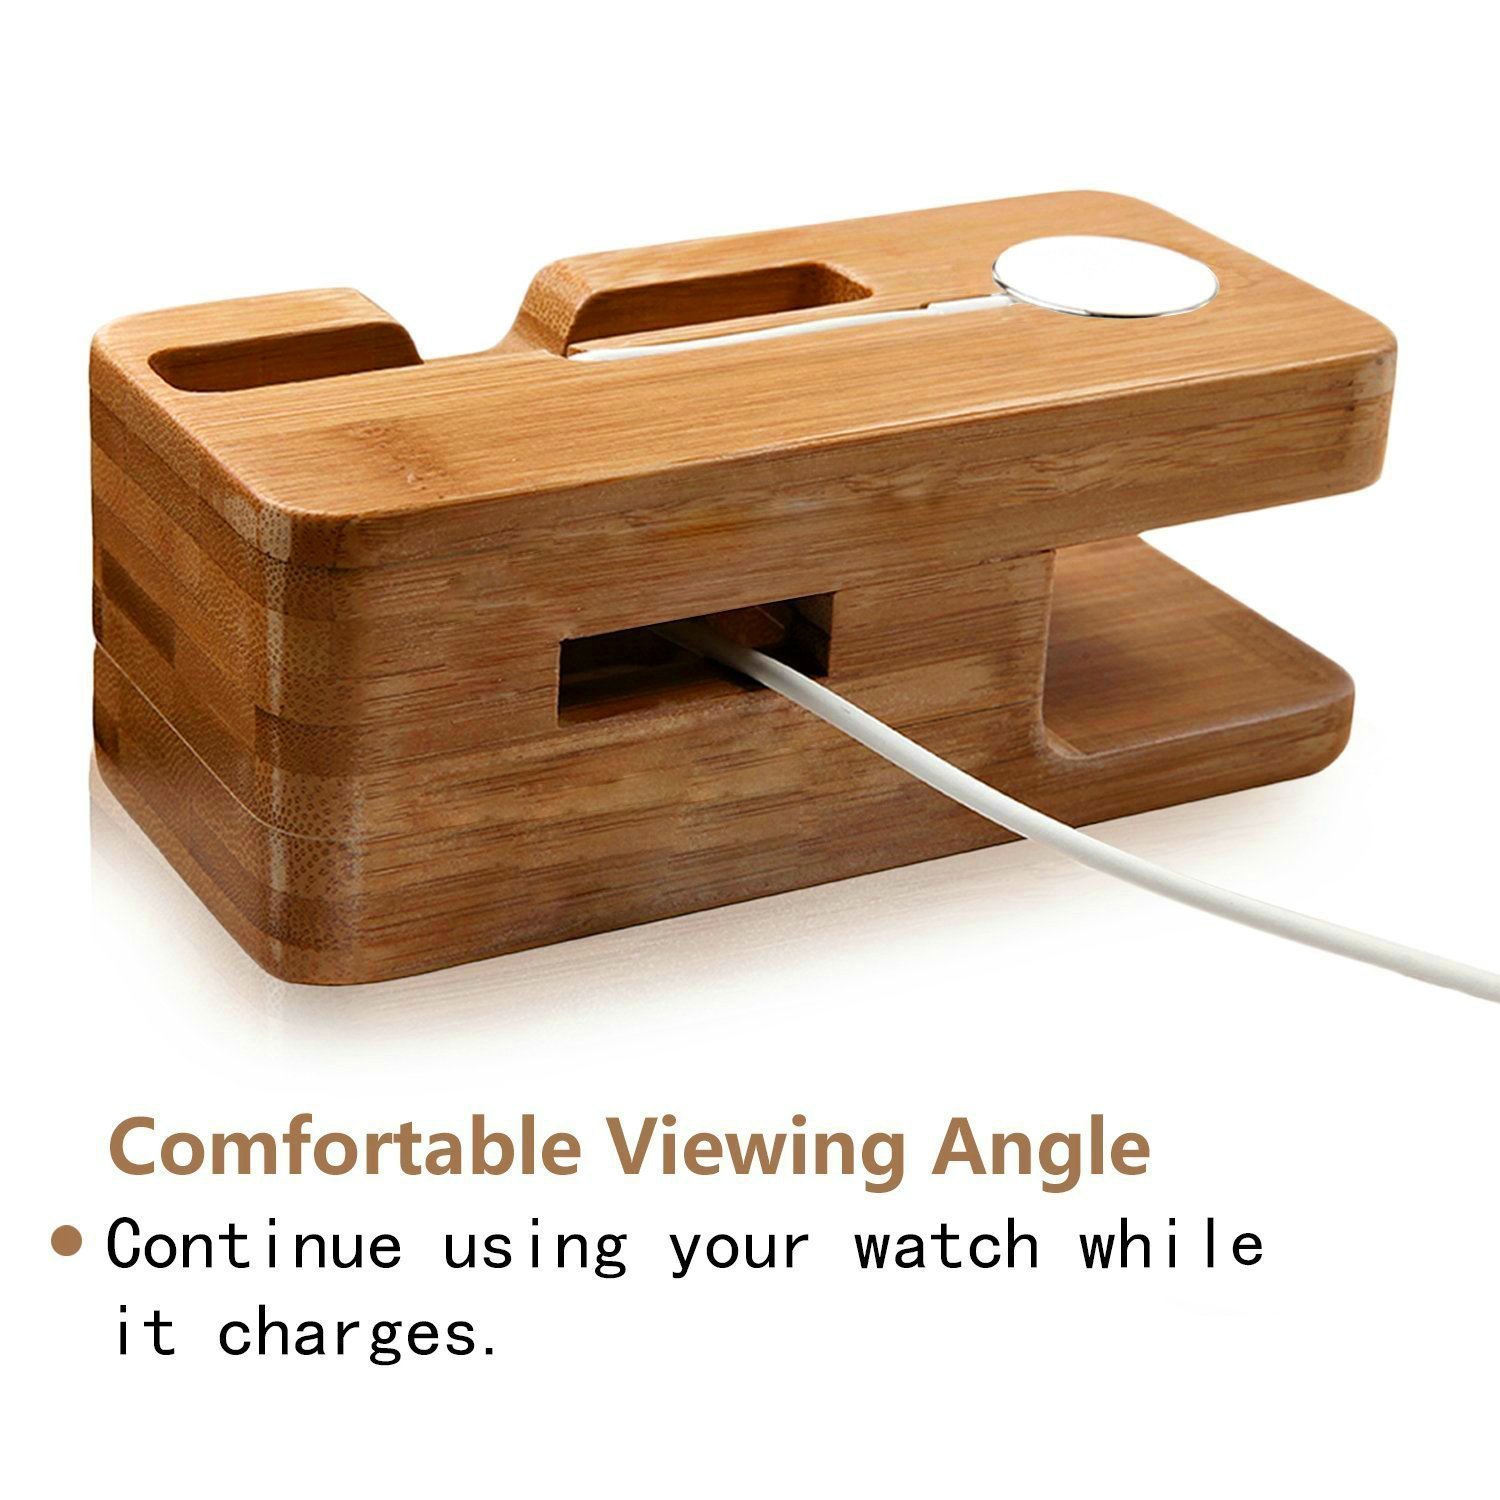 Watch Stand,AICase Bamboo Wood Charge Dock,Charge Dock Holder,Bamboo Wood Charge Station/Cradle for Apple Watch,iPhone,smartphone,iPhone iPad and Smartphones and Tablets (Bamboo Wood) - image 4 of 6